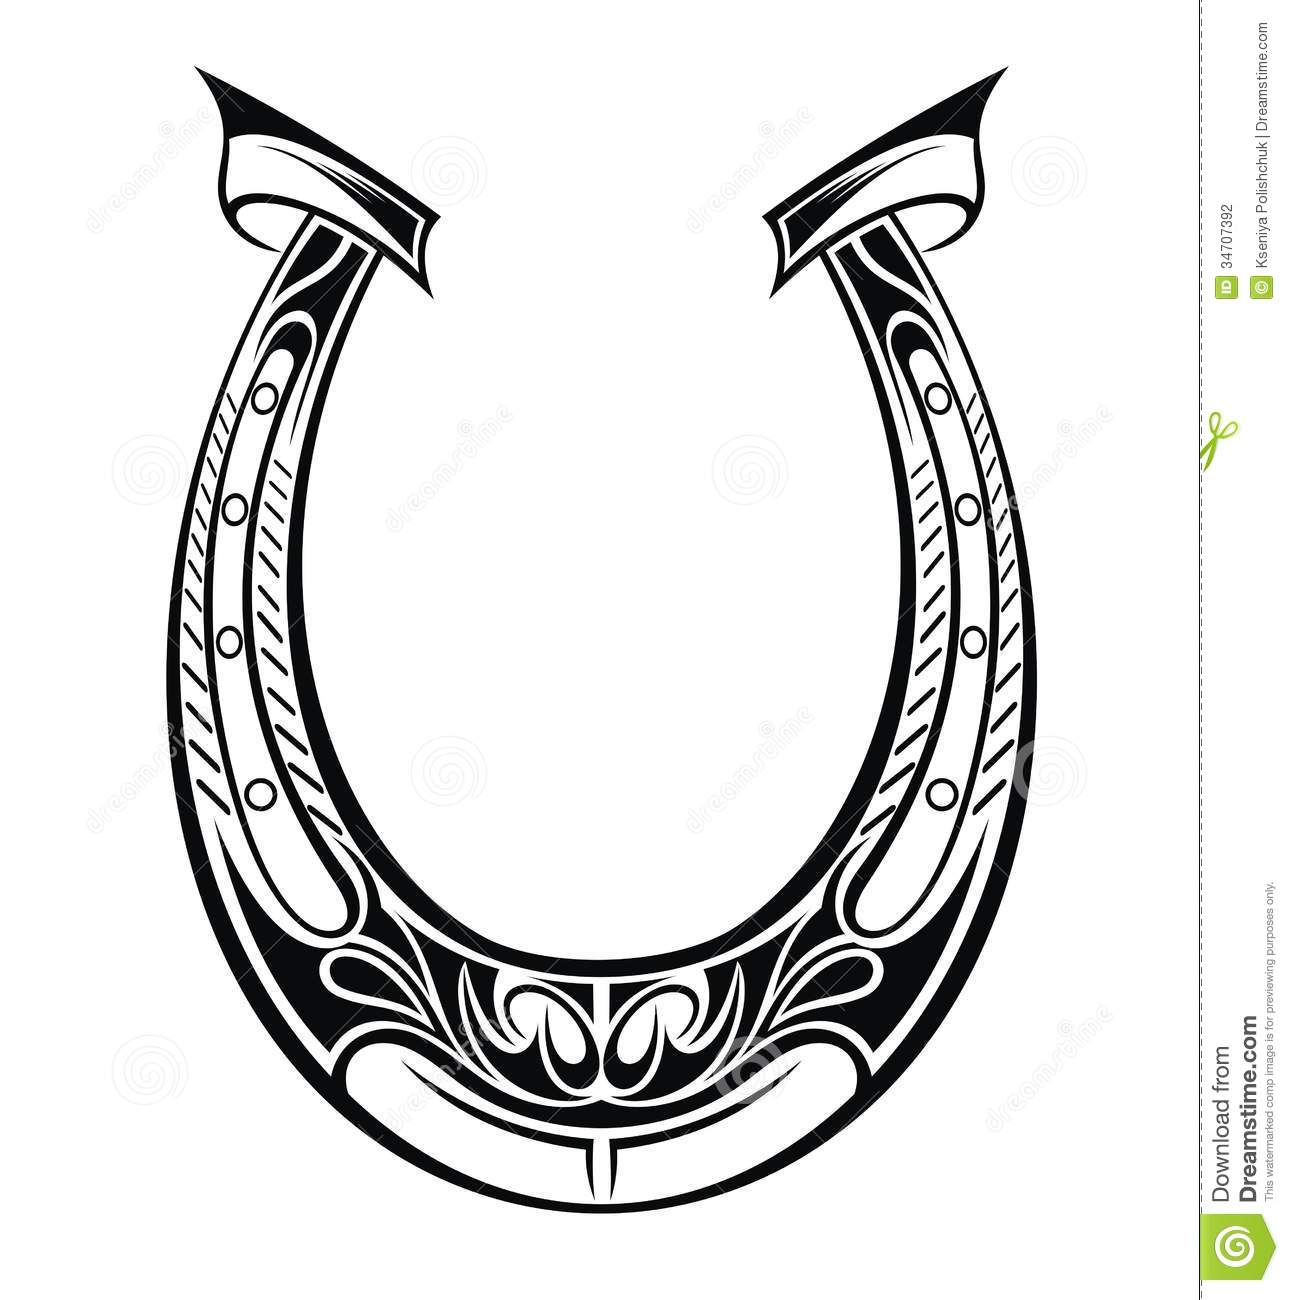 Horse Shoe Clipart Black And White   Clipart Panda   Free Clipart